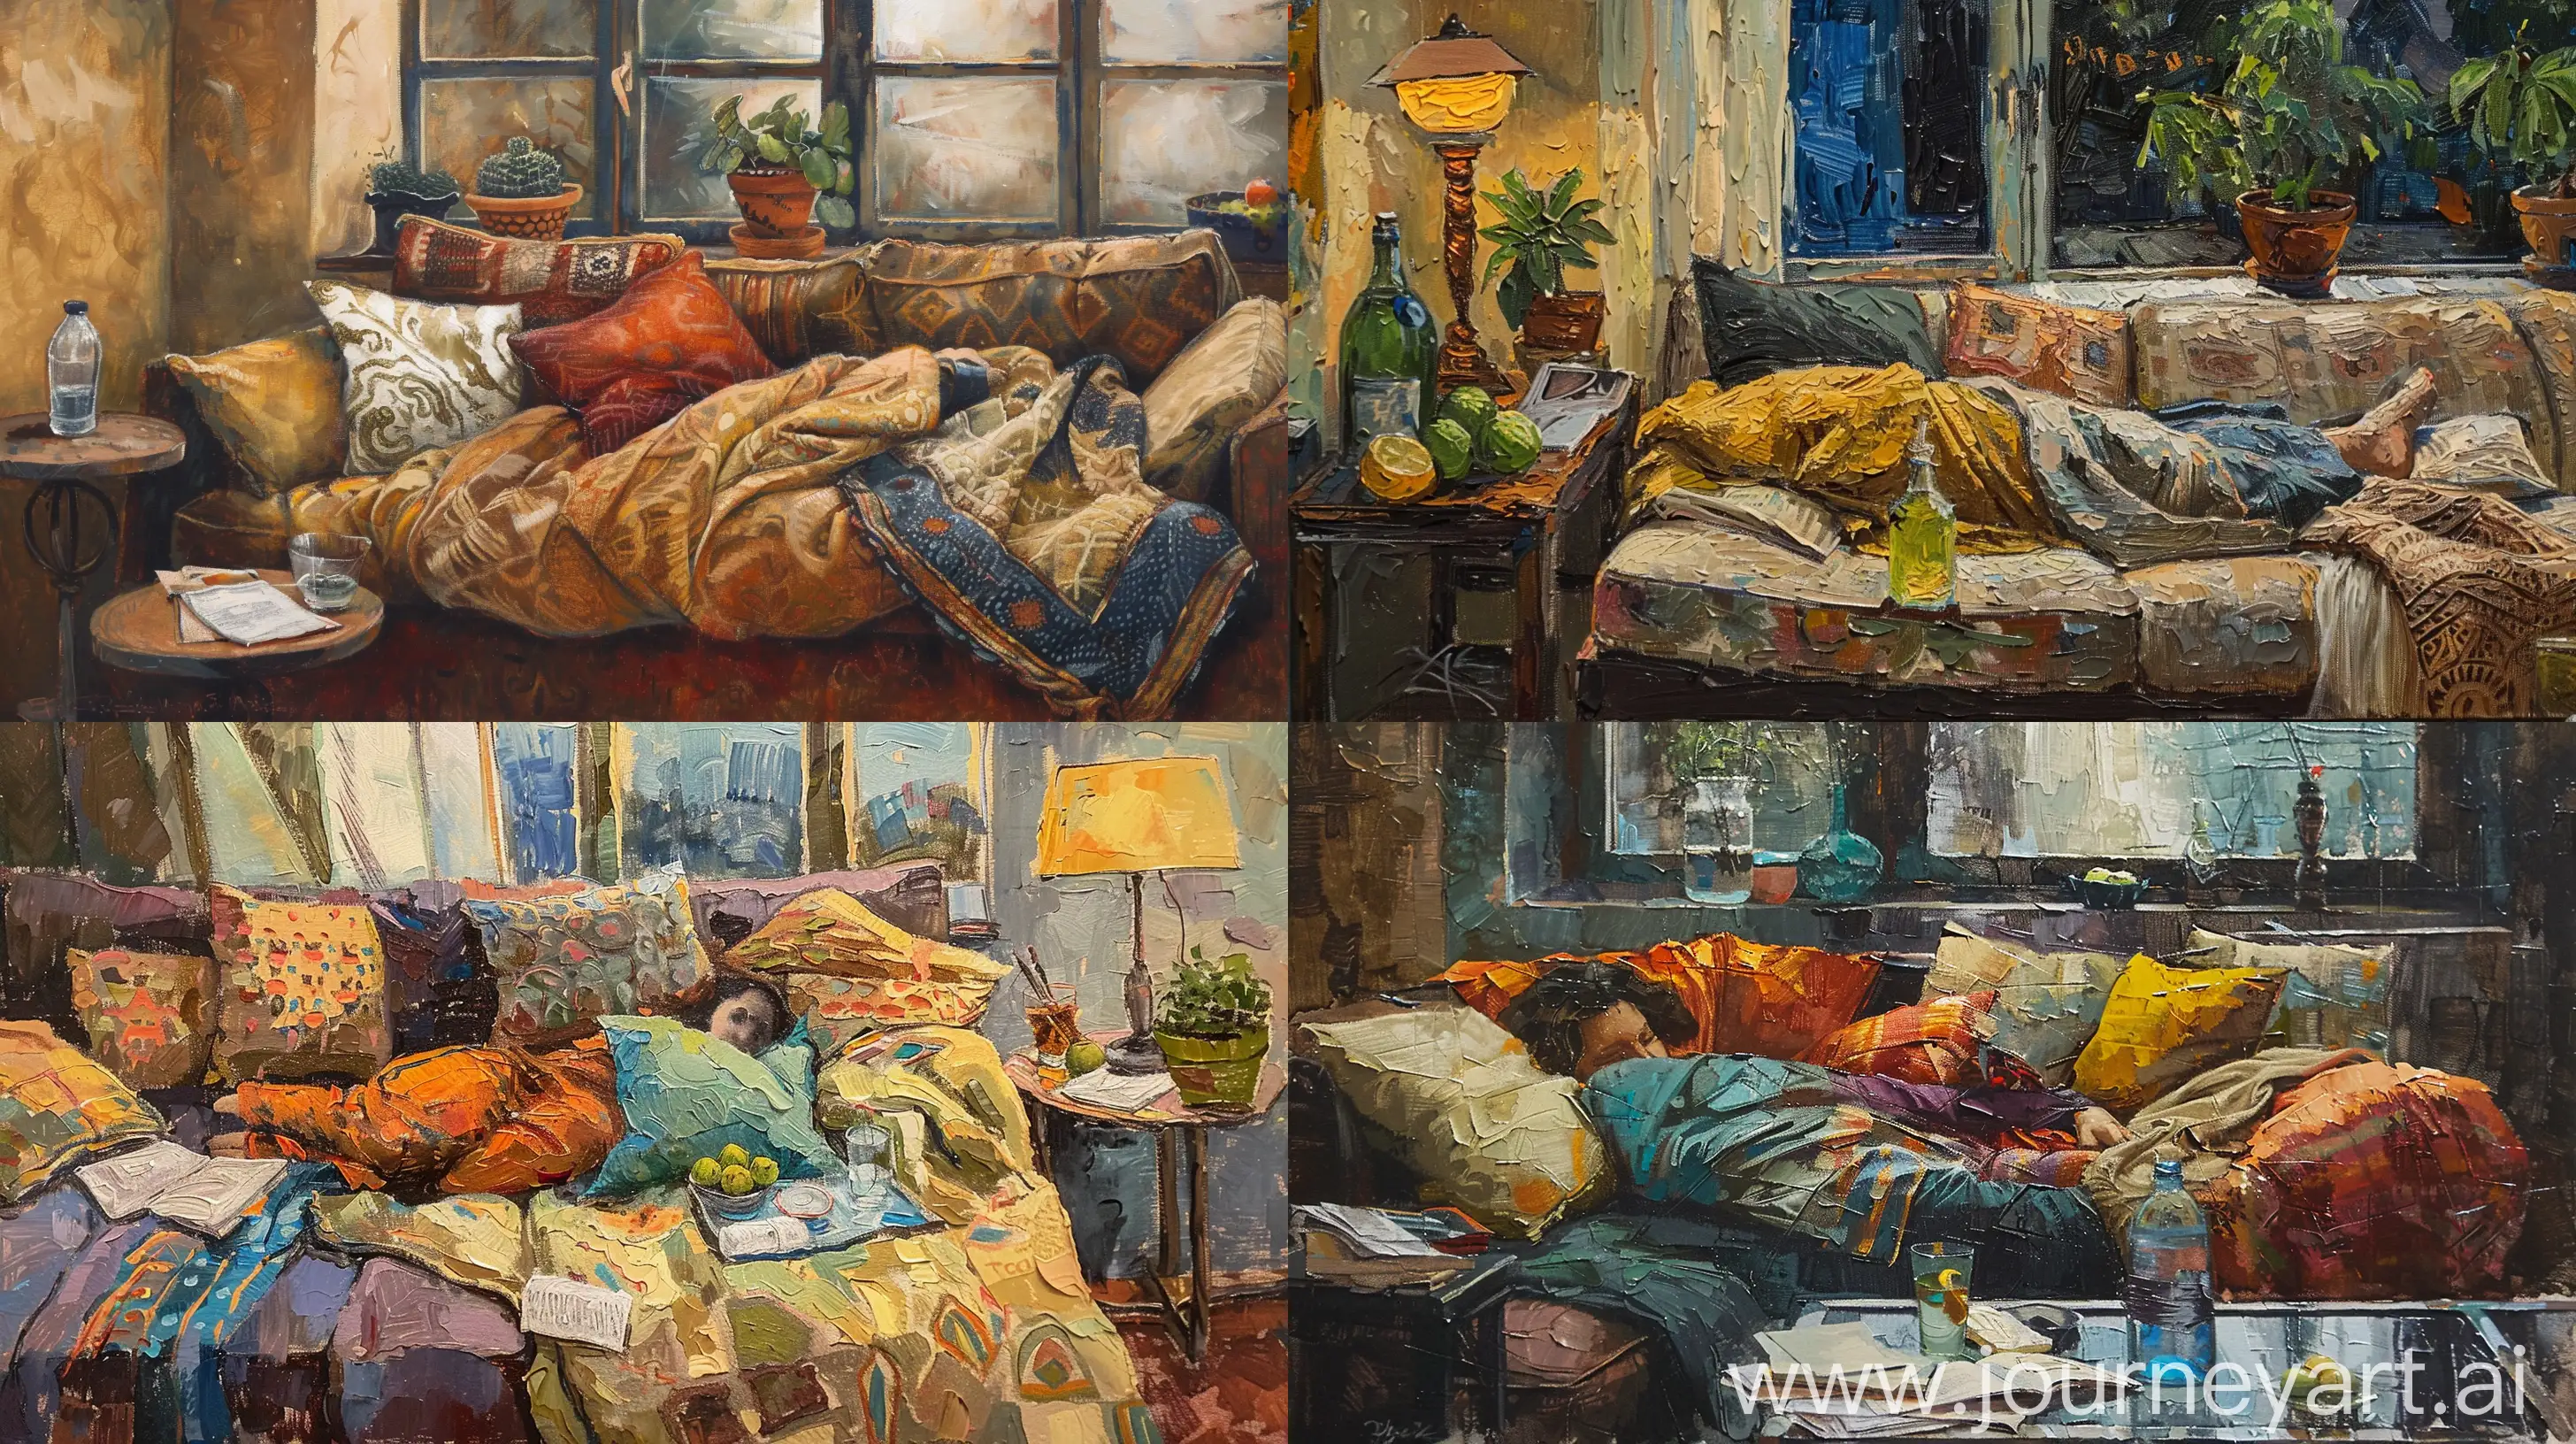 textured oil painting of an indoor scene, a person lying on the couch, The scene should include a cozy room with various pillows and a blanket on the couch, a window showing an outdoor view, a side table with a glass of water, a bottle, and papers or a book. Add a bowl of green fruit and a potted plant for a natural touch, Use an warm earthy color palette and paint a textured painting style, scene is in nighttime --ar 16:9
